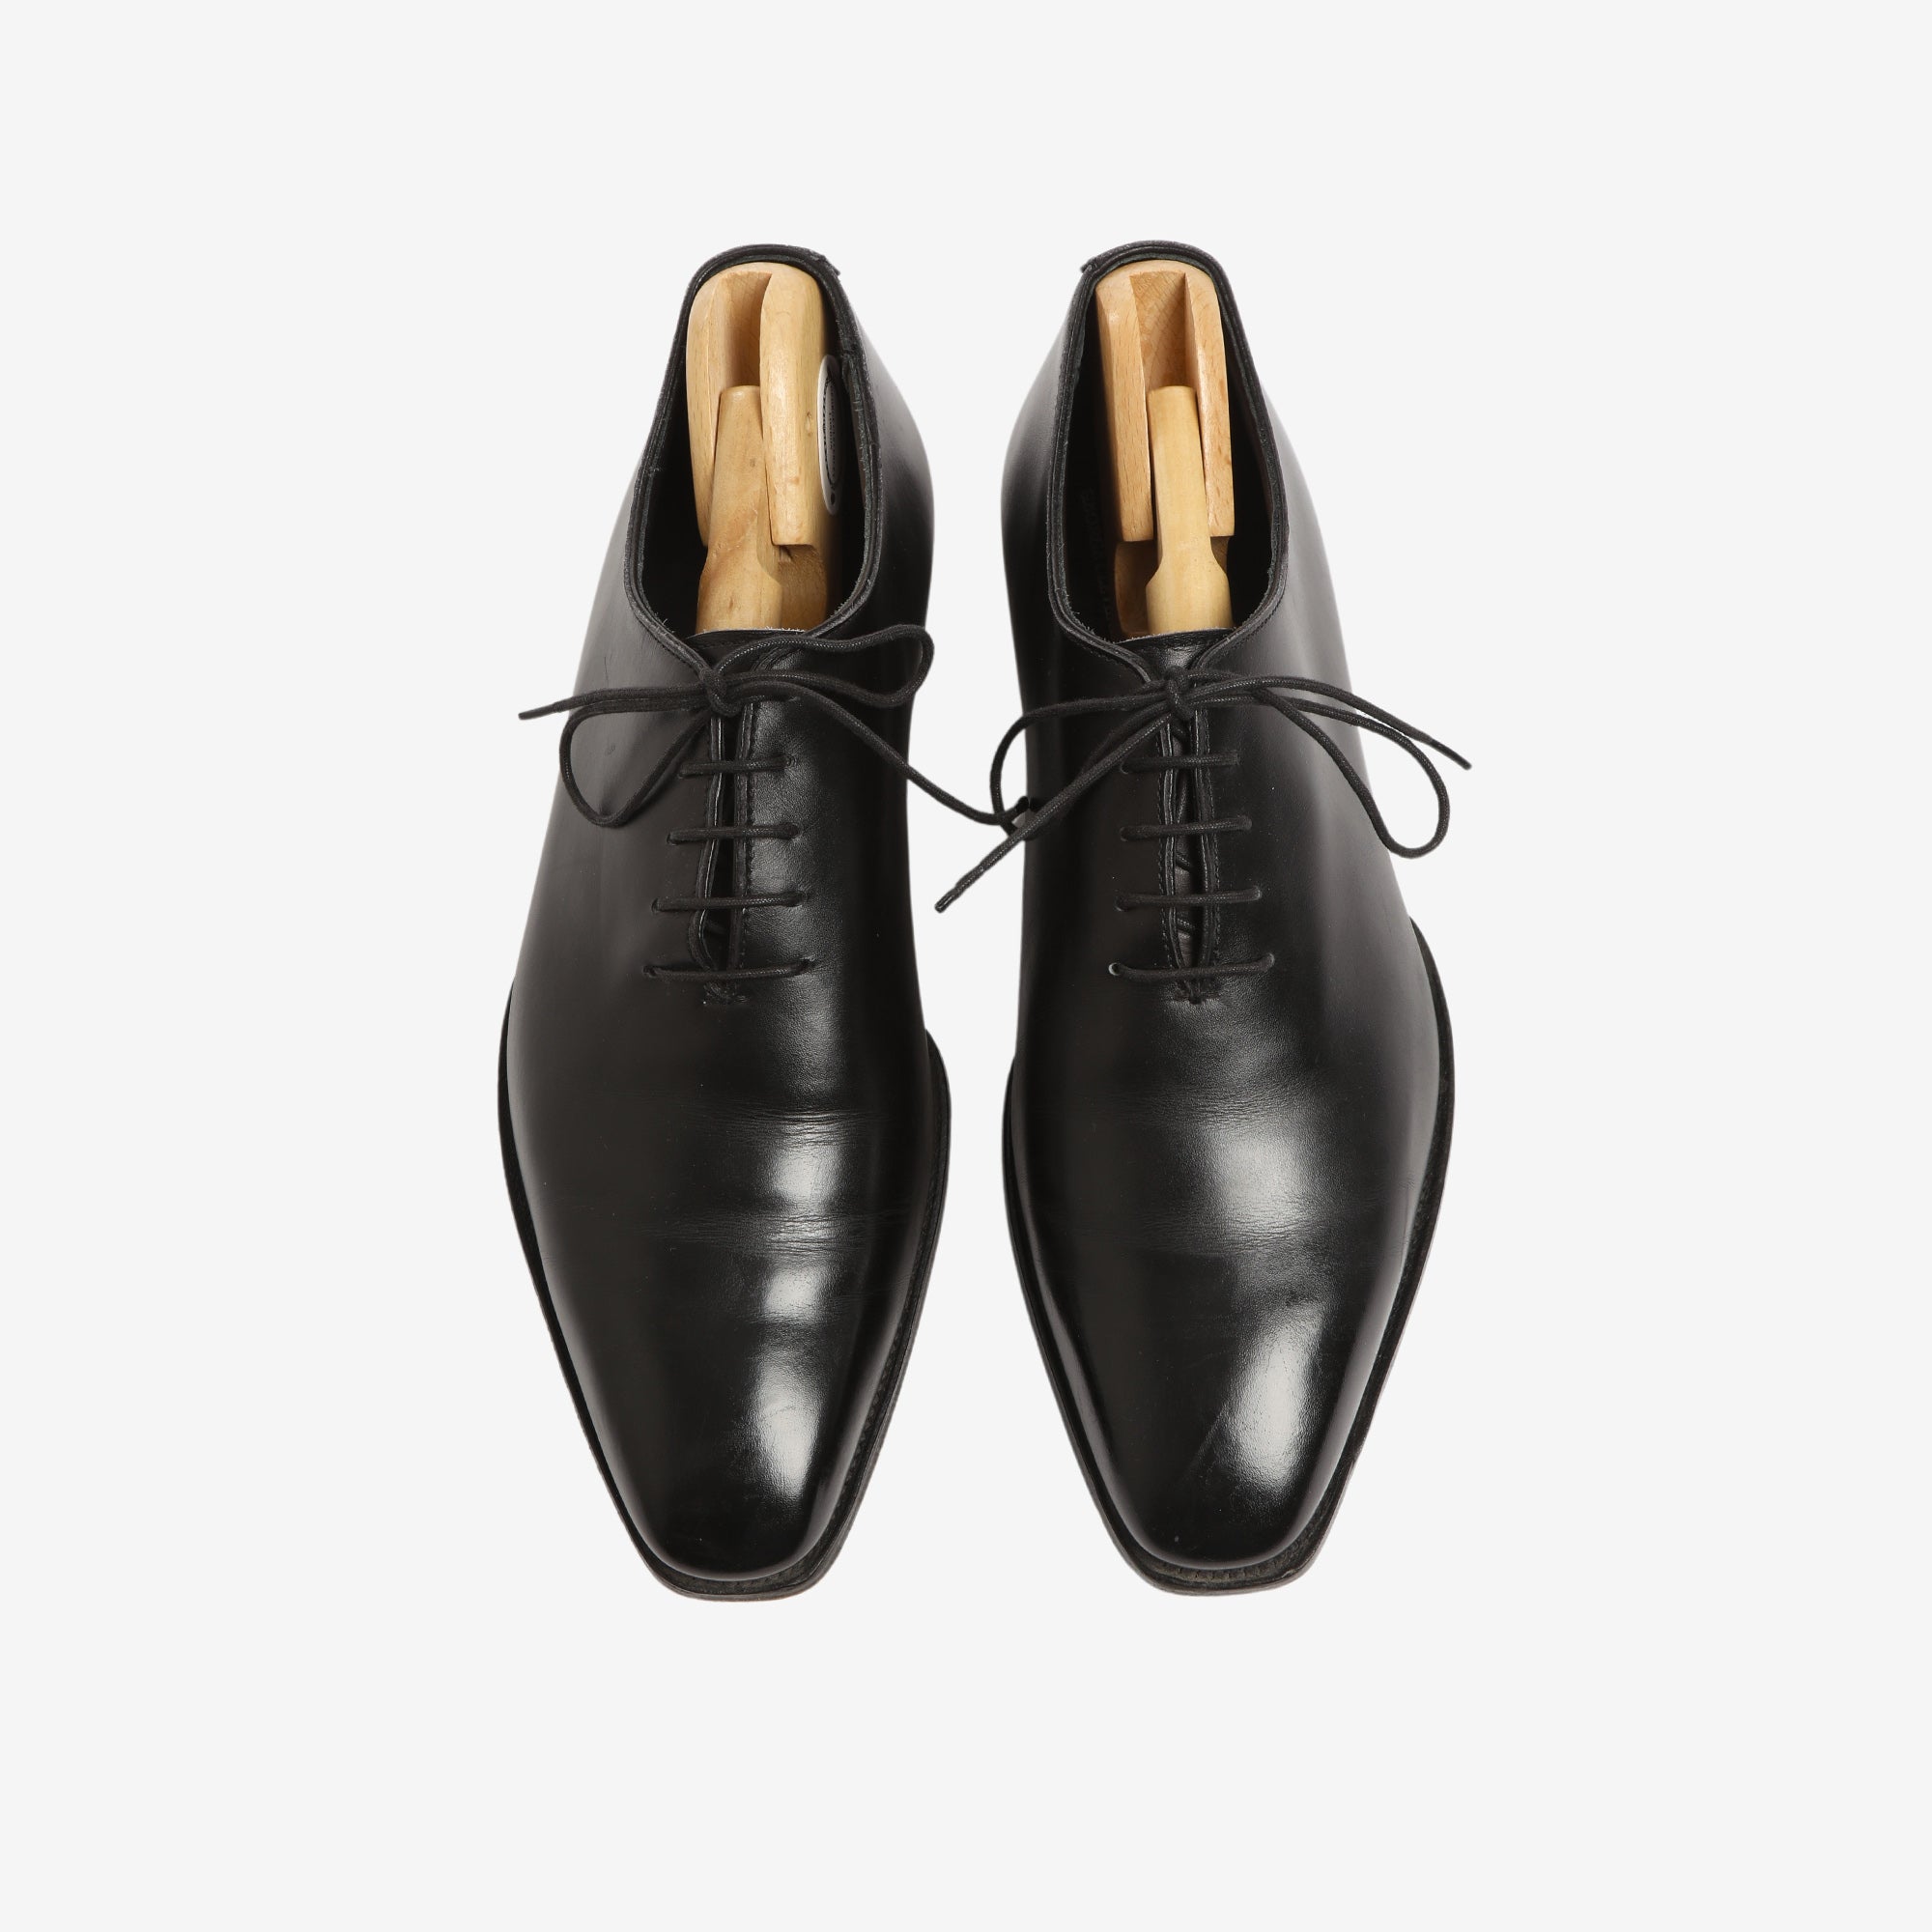 Merlin Leather Oxford Shoes